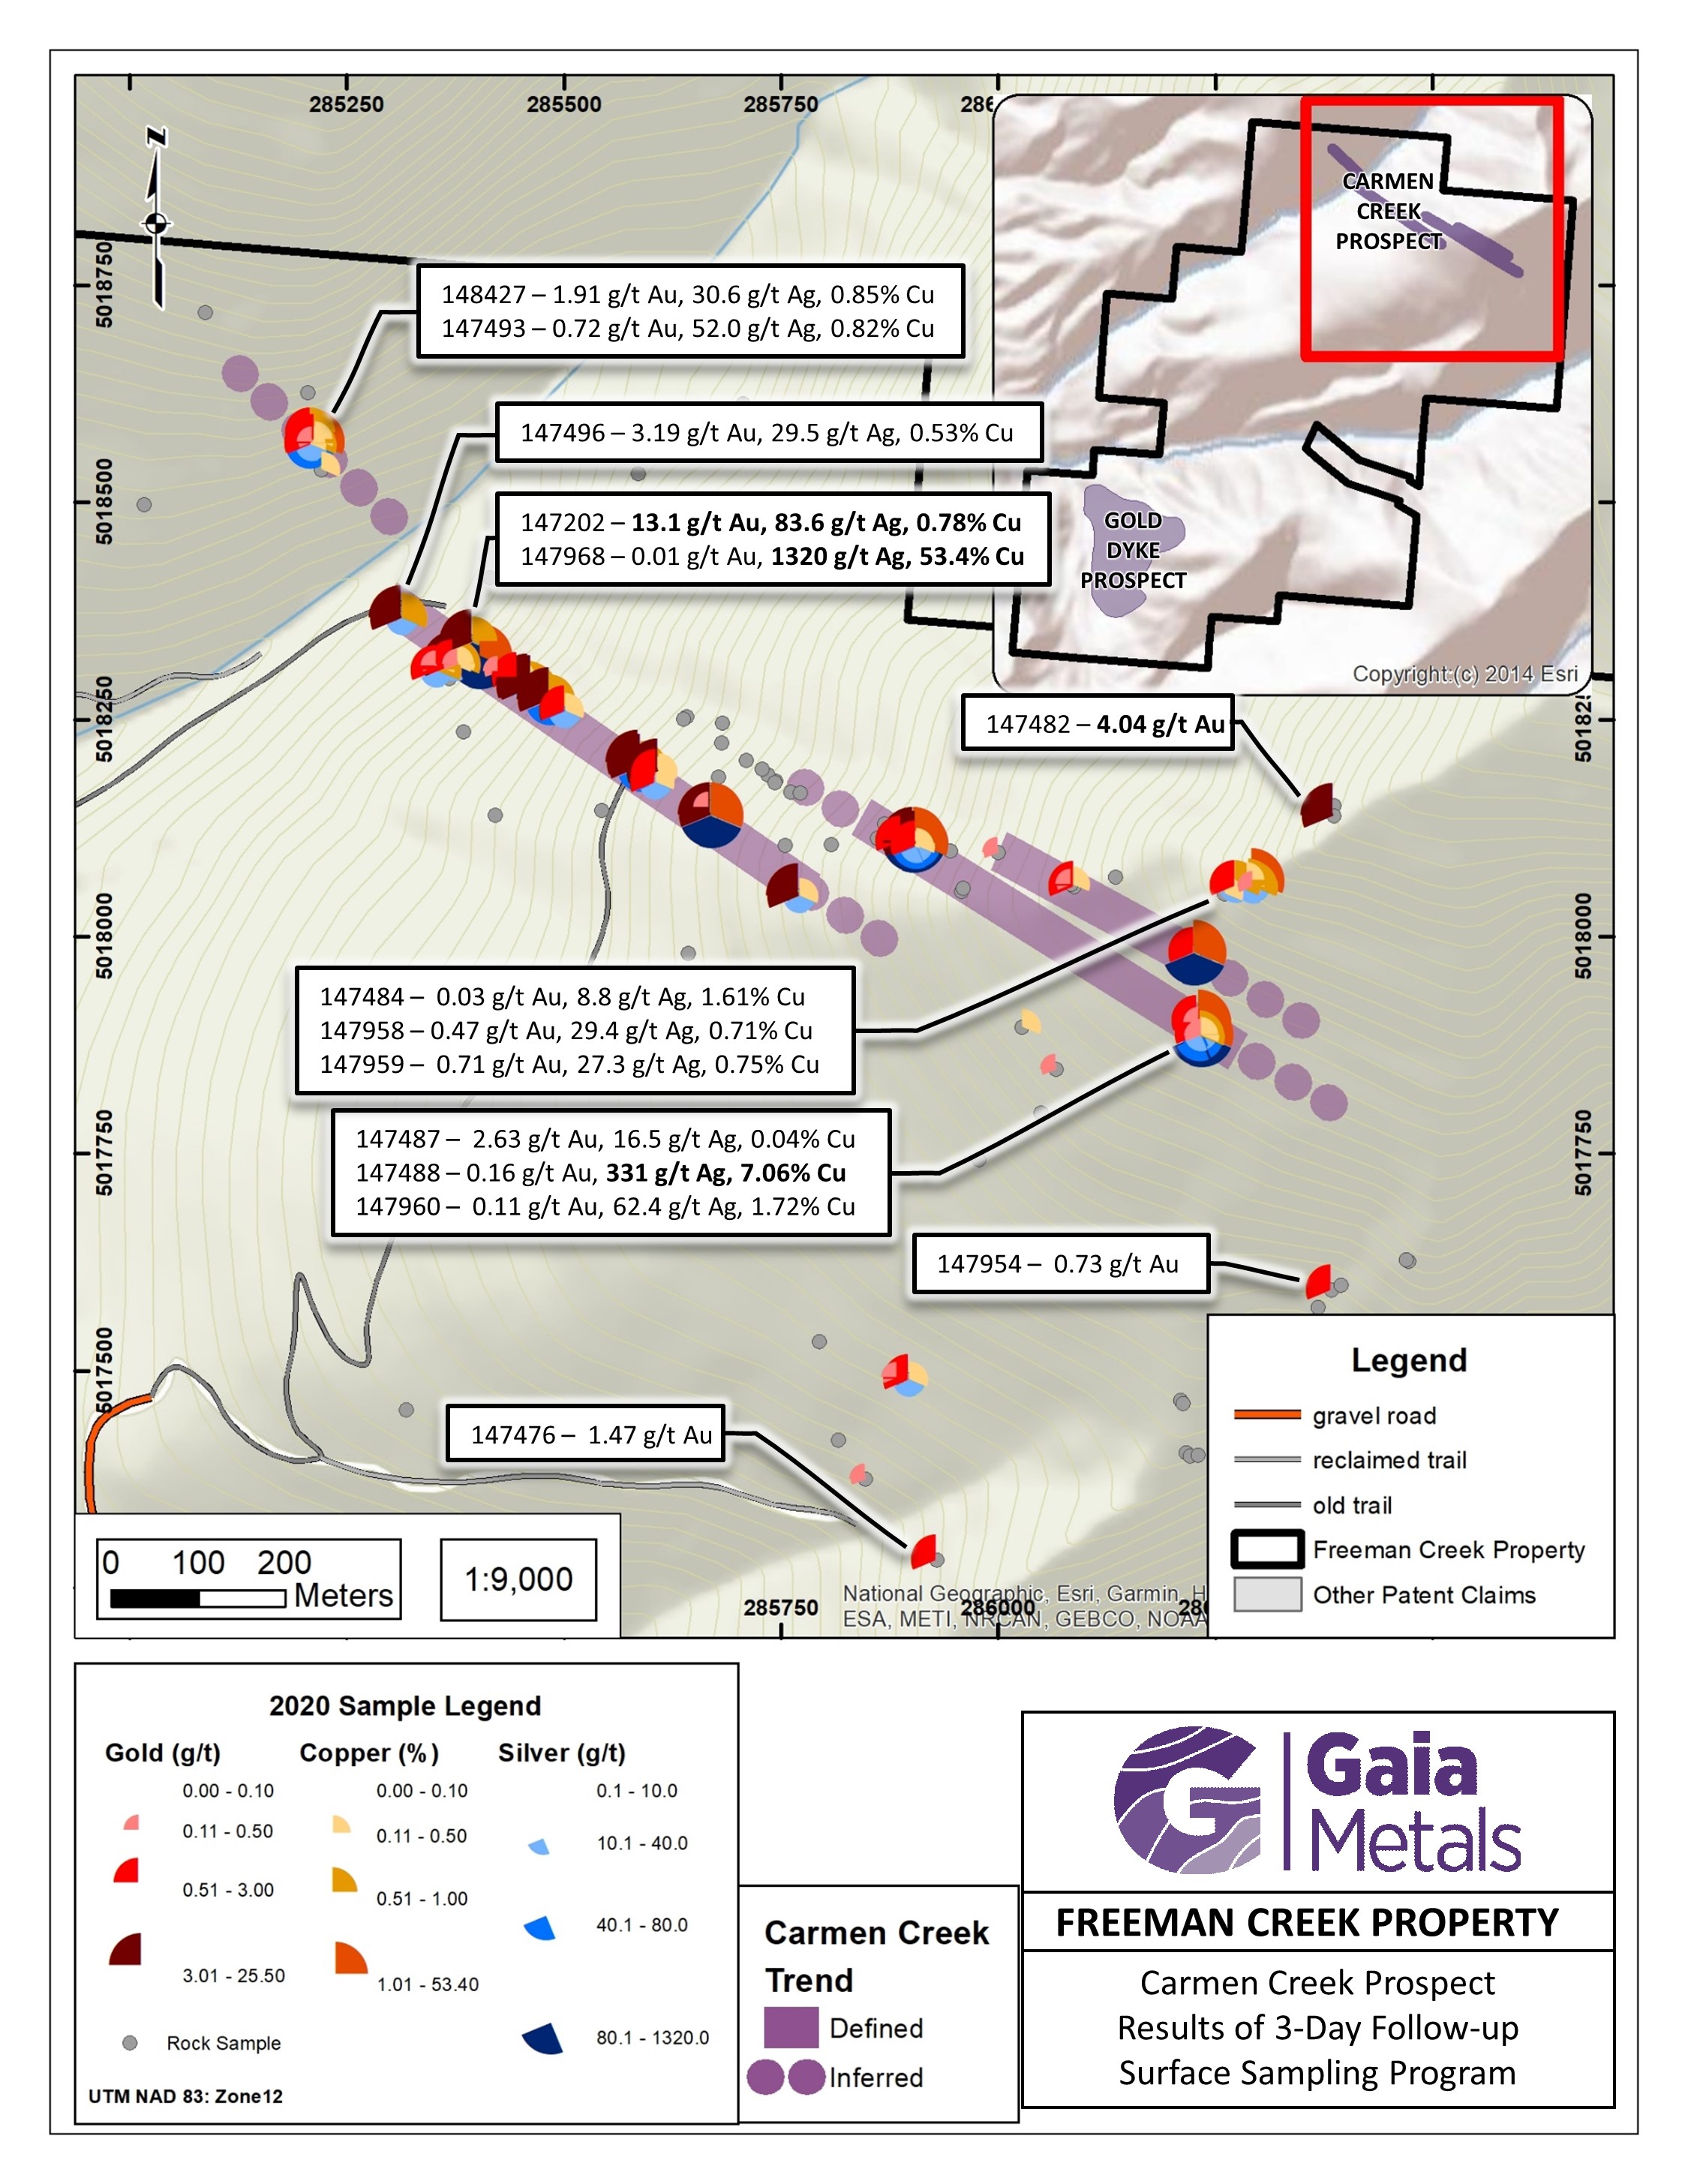 Gaia Metals Corp., Tuesday, November 24, 2020, Press release picture